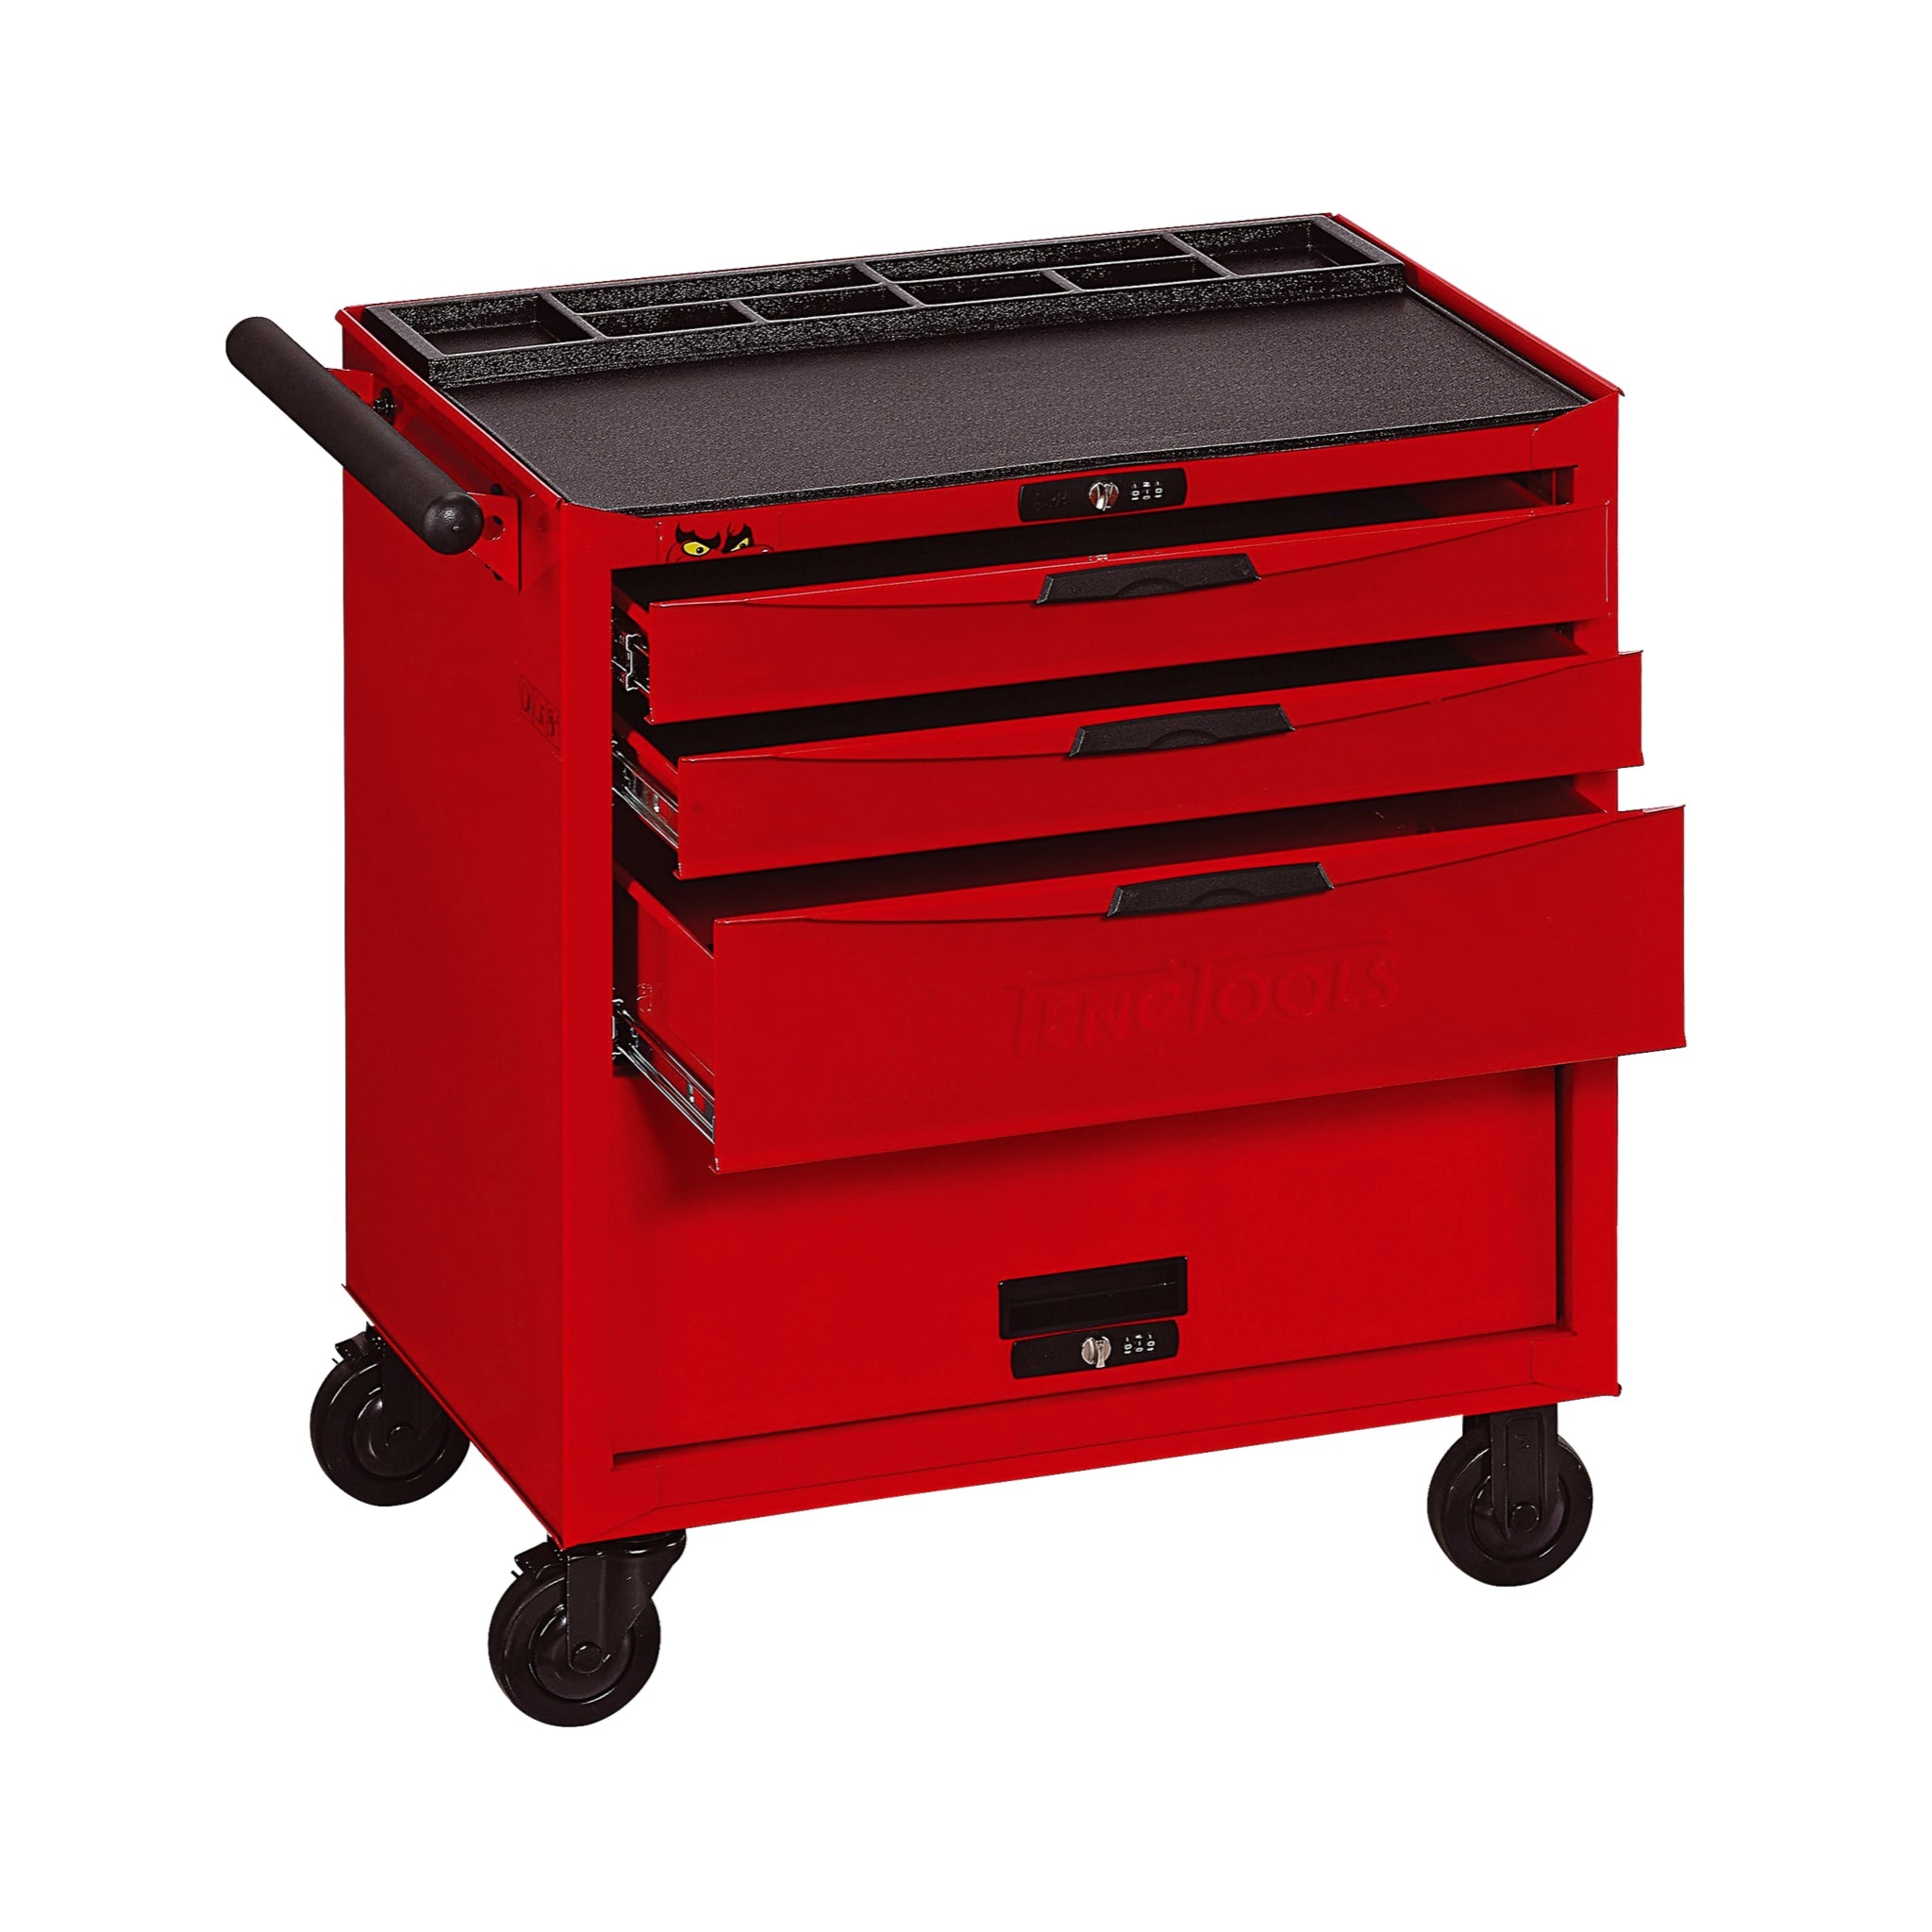 Teng Tools 3 Drawer Heavy Duty Roller Cabinet Tool Chest / Wagon - TCW803N